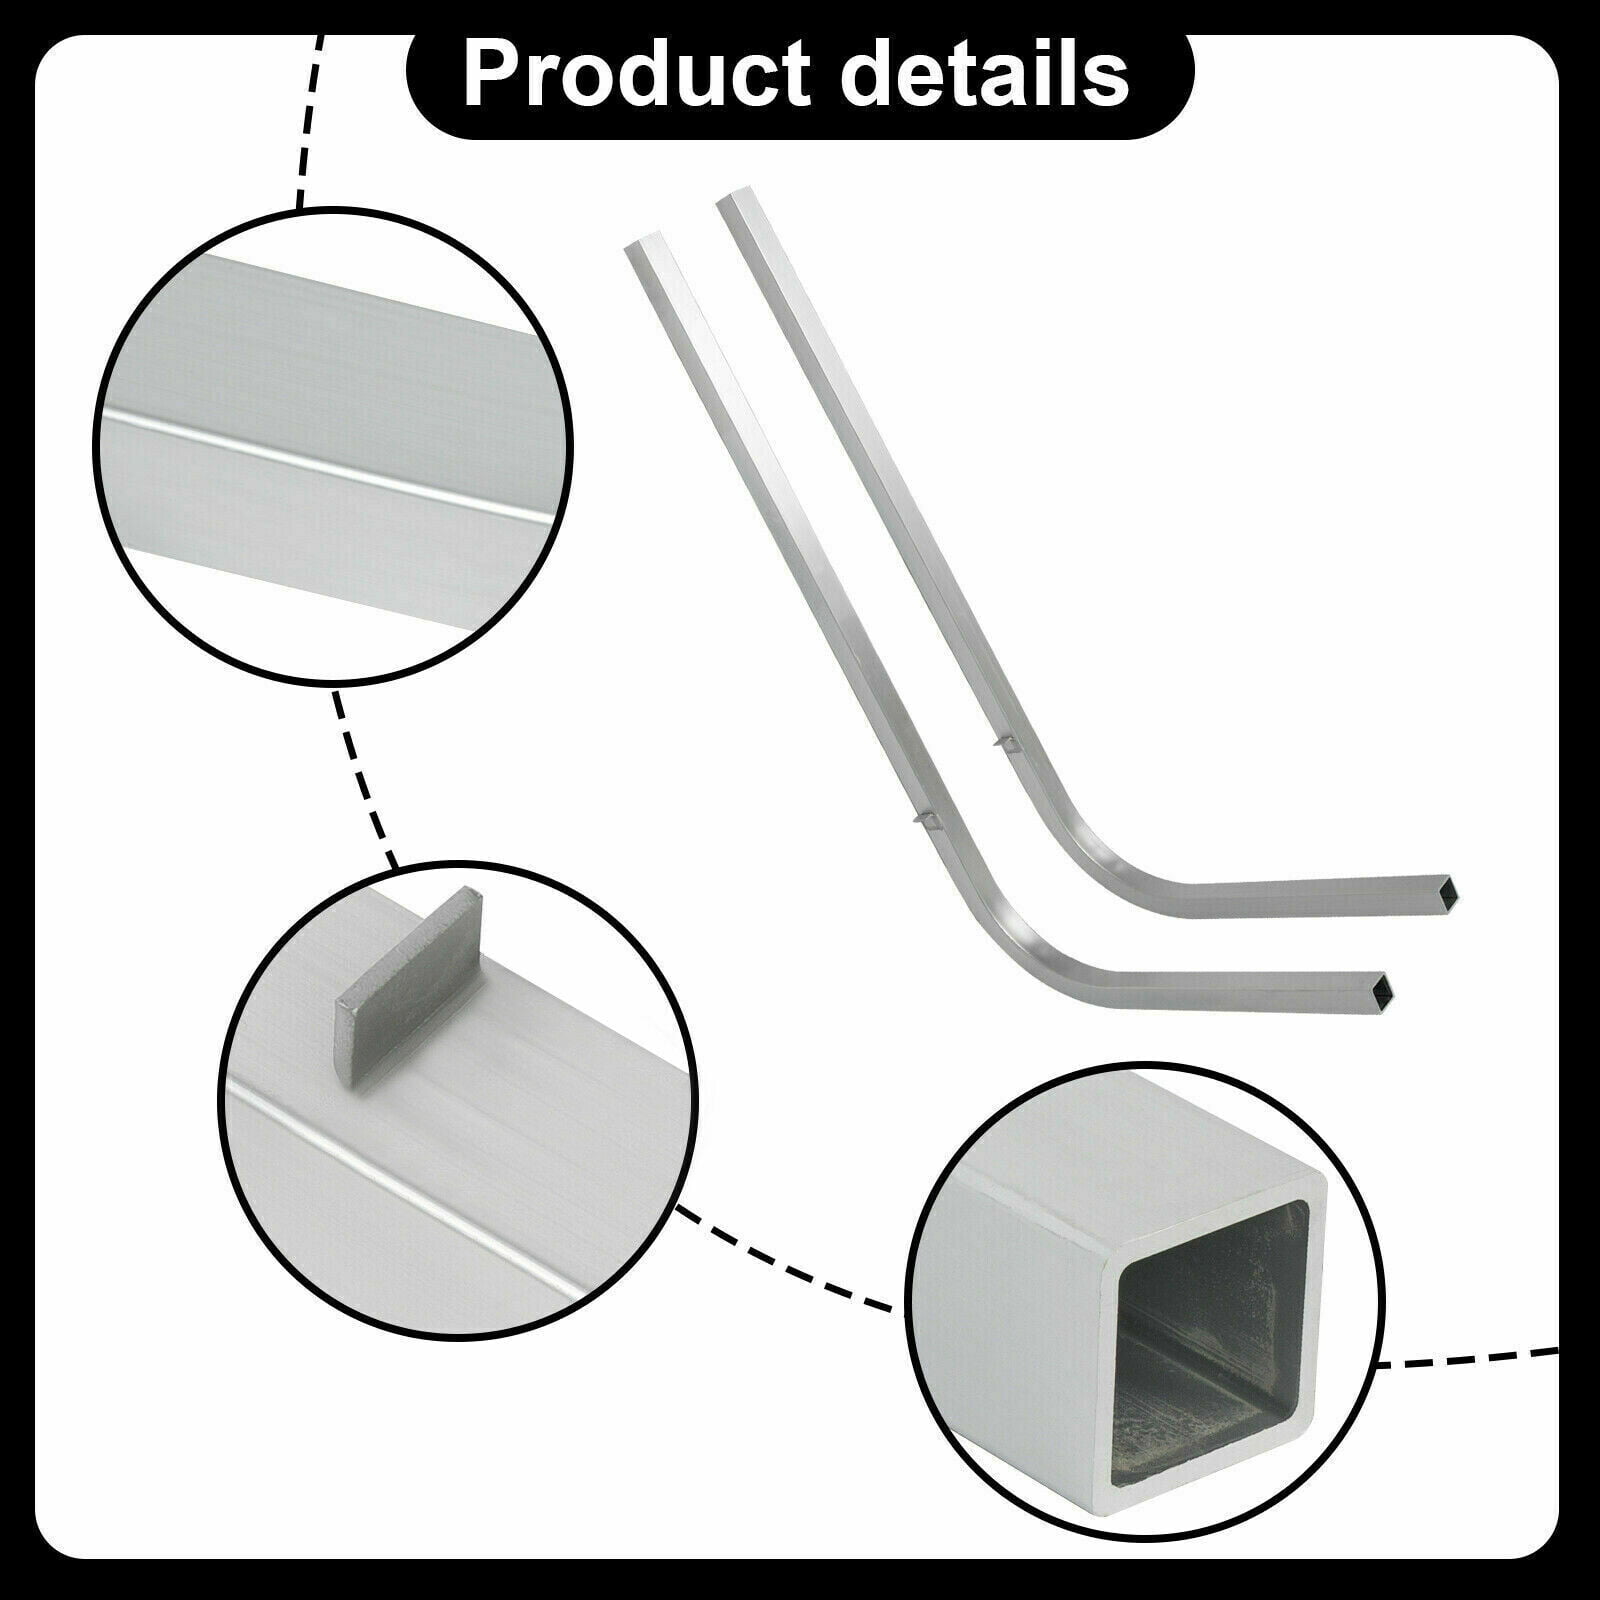 Boat Trailer Aluminum Square Upright Guide Poles With PVC Poles and Caps